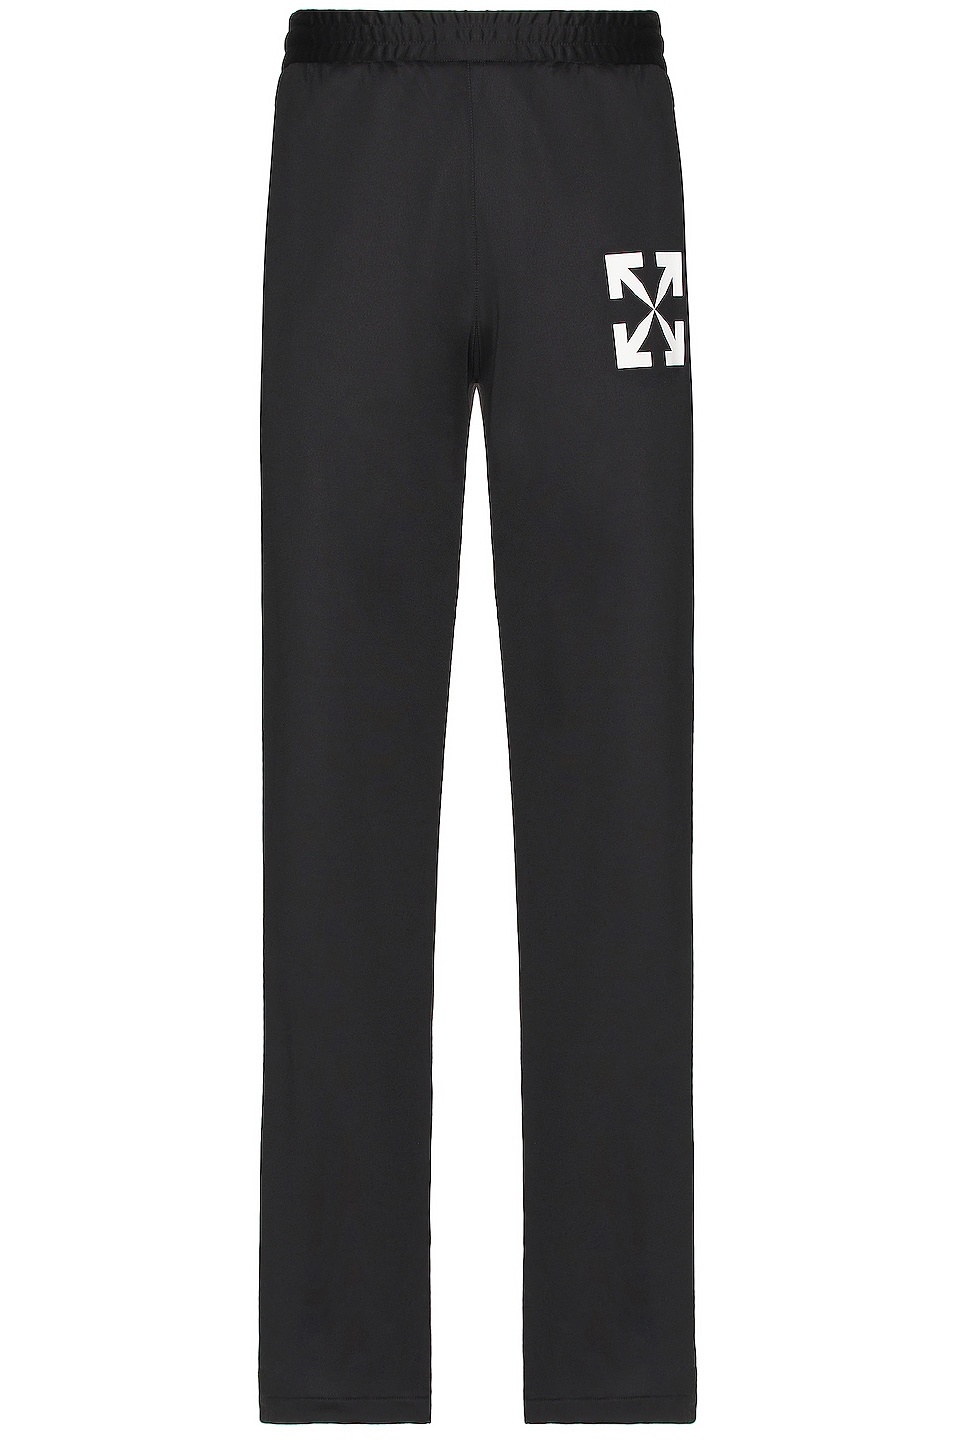 Image 1 of OFF-WHITE Single Arrow Slim Trackpant in Black & White